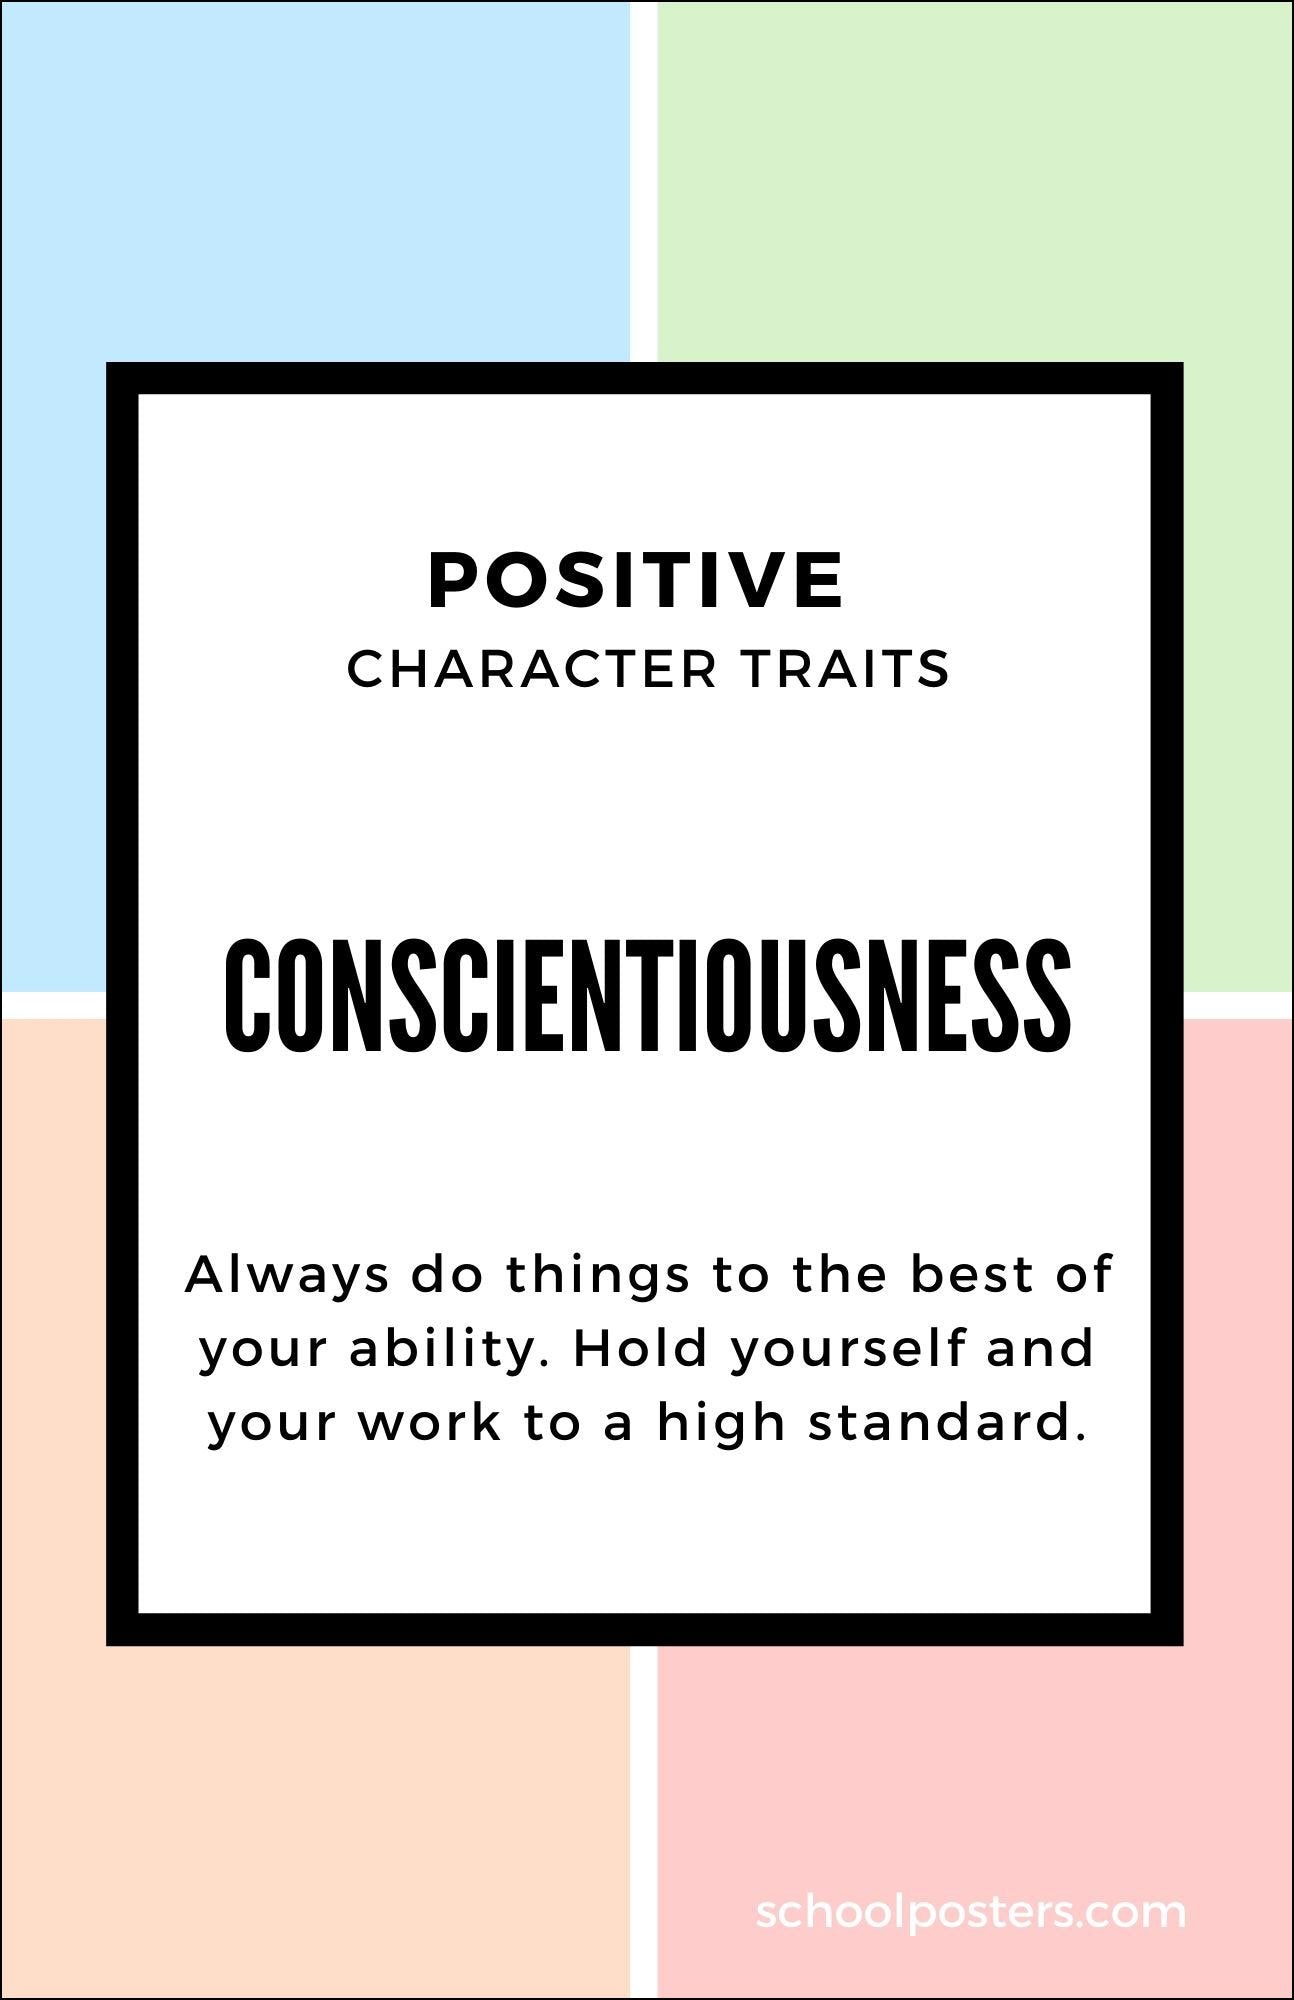 Character Conscientiousness Poster